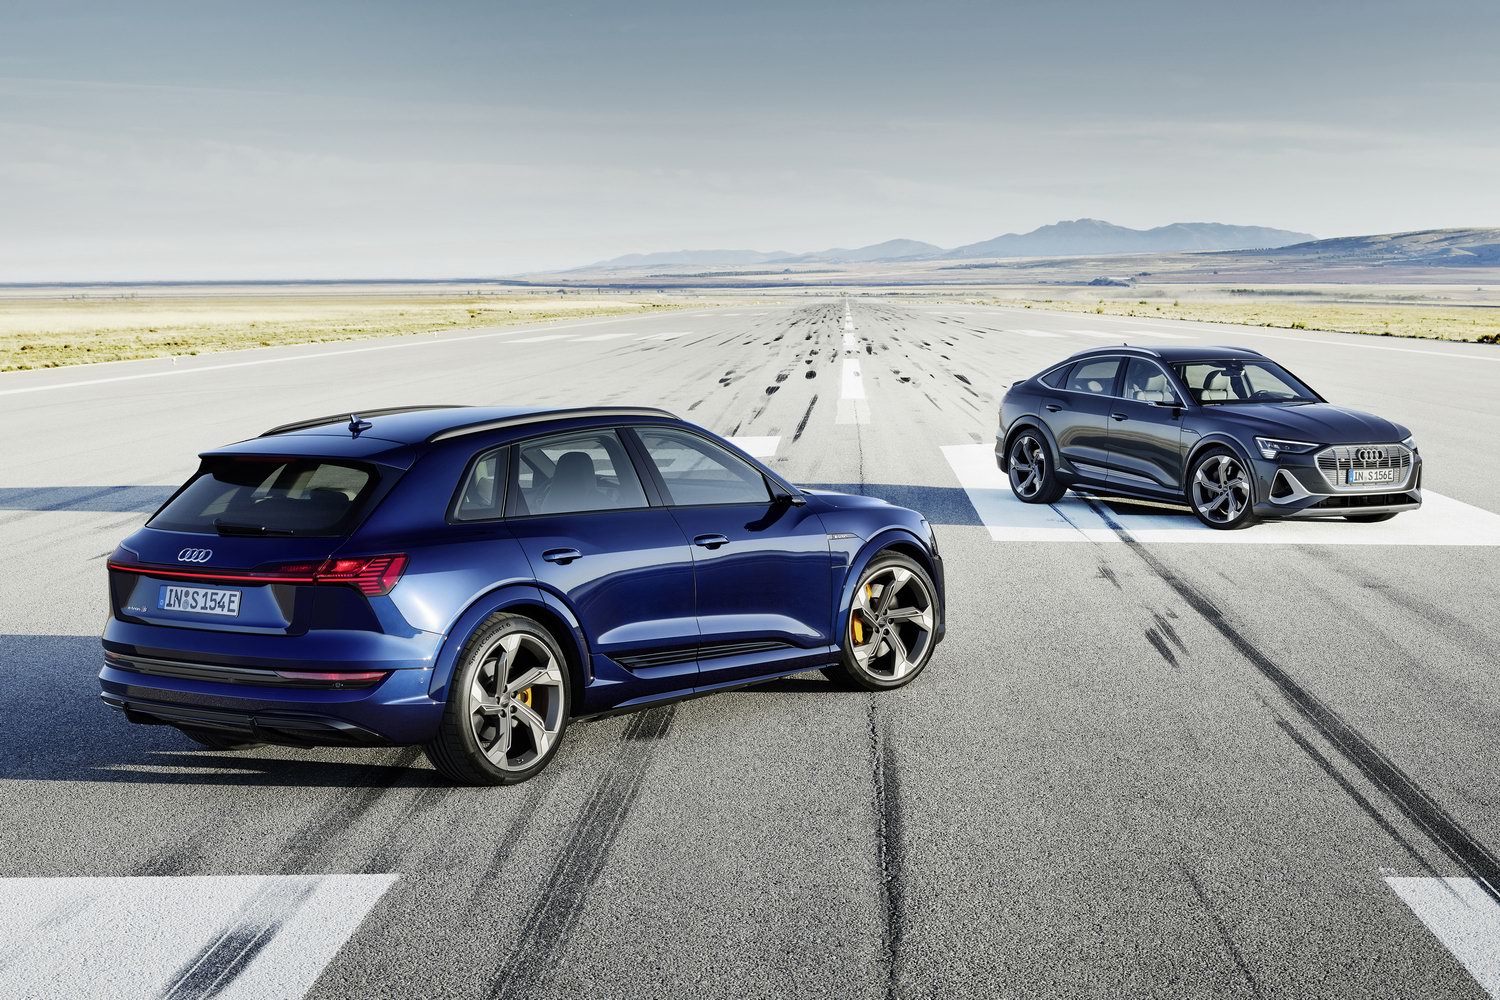 Car News | Audi e-tron S variants add a sportier side to EV driving